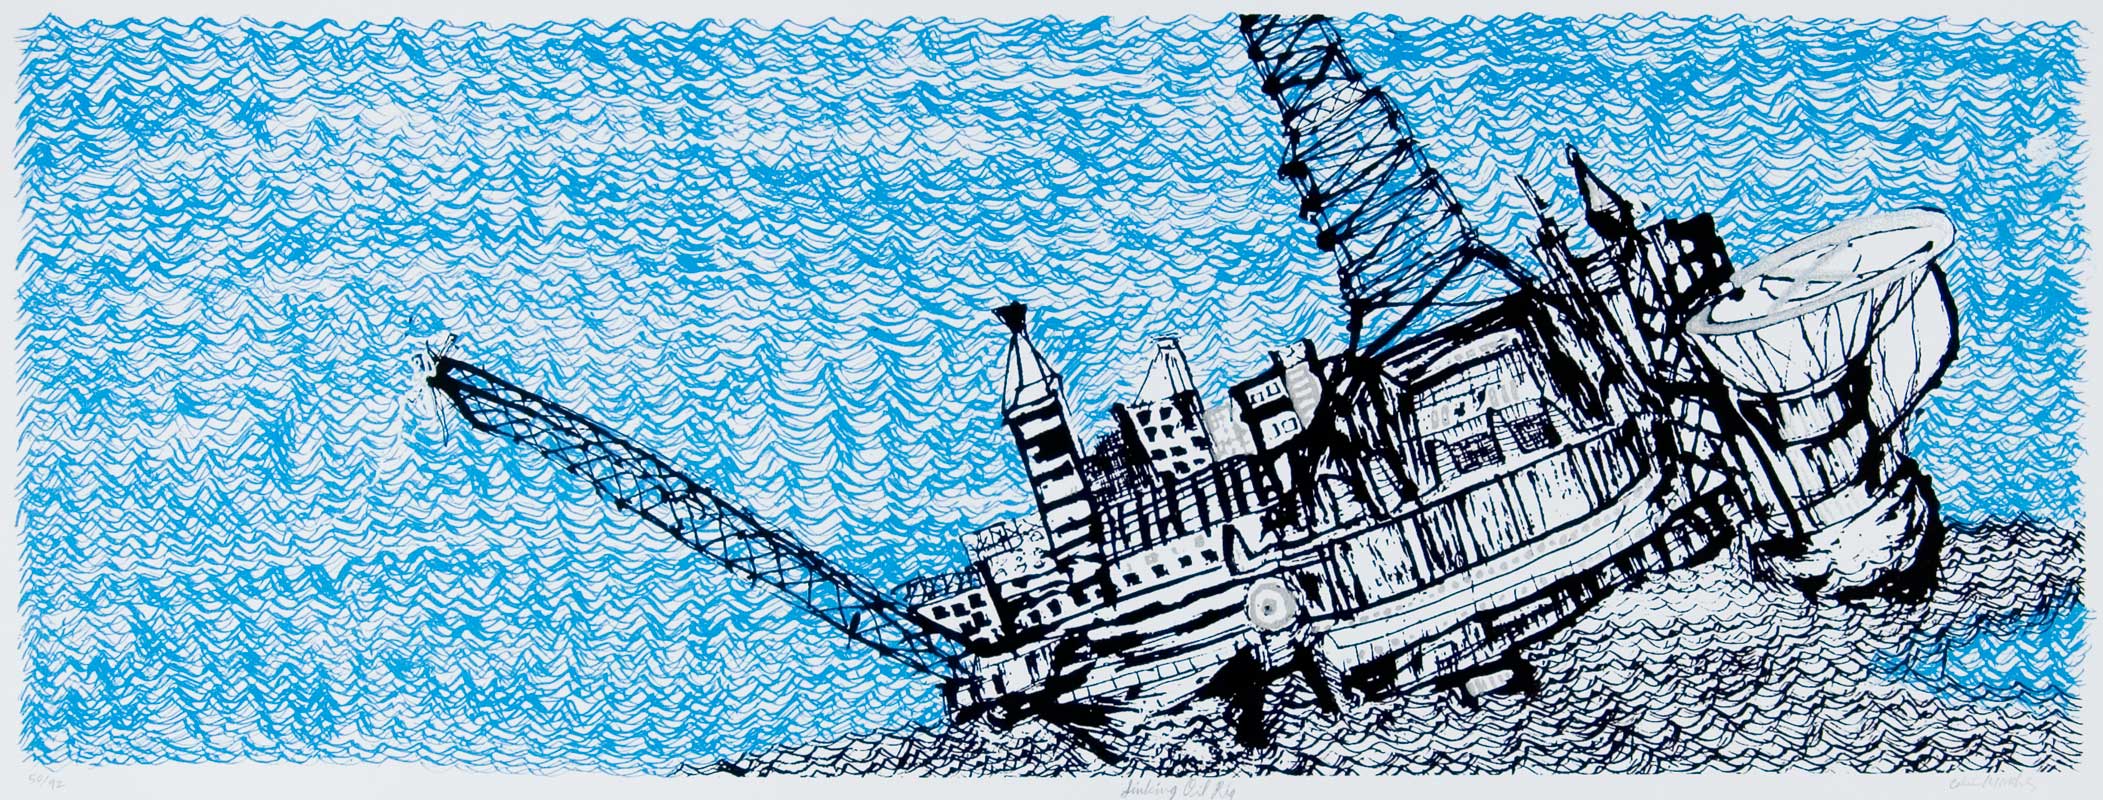 Justseeds Sinking Oil Rig